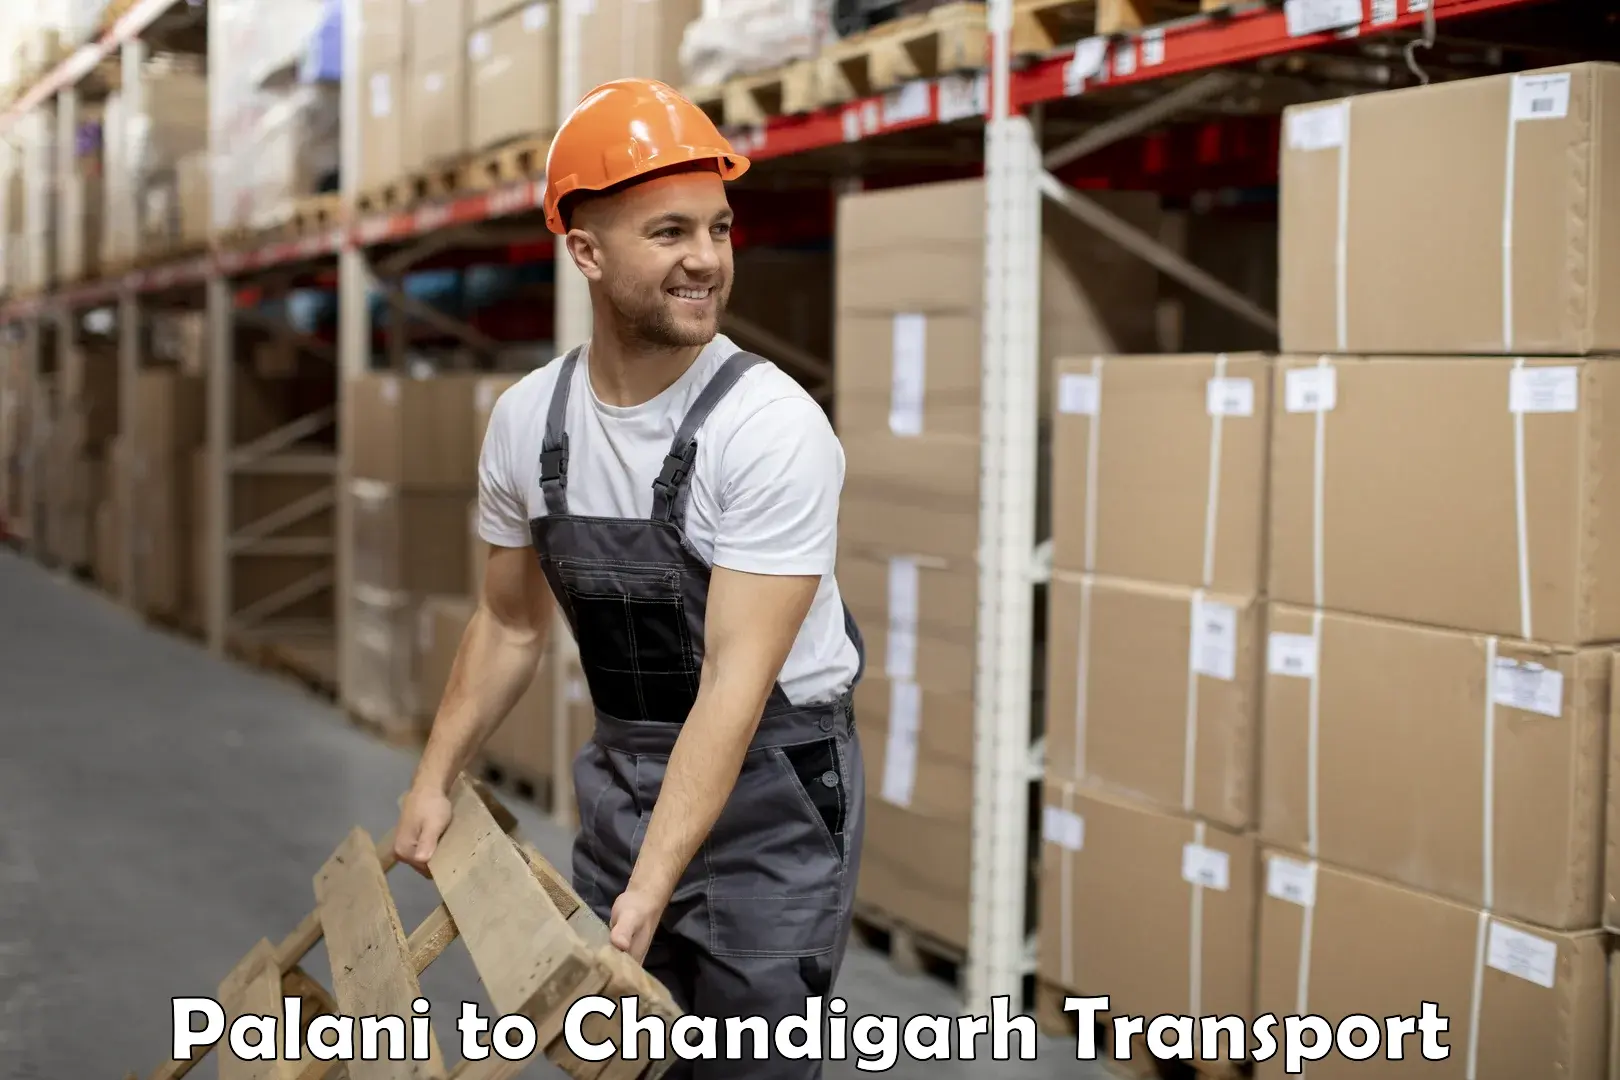 Container transport service Palani to Chandigarh